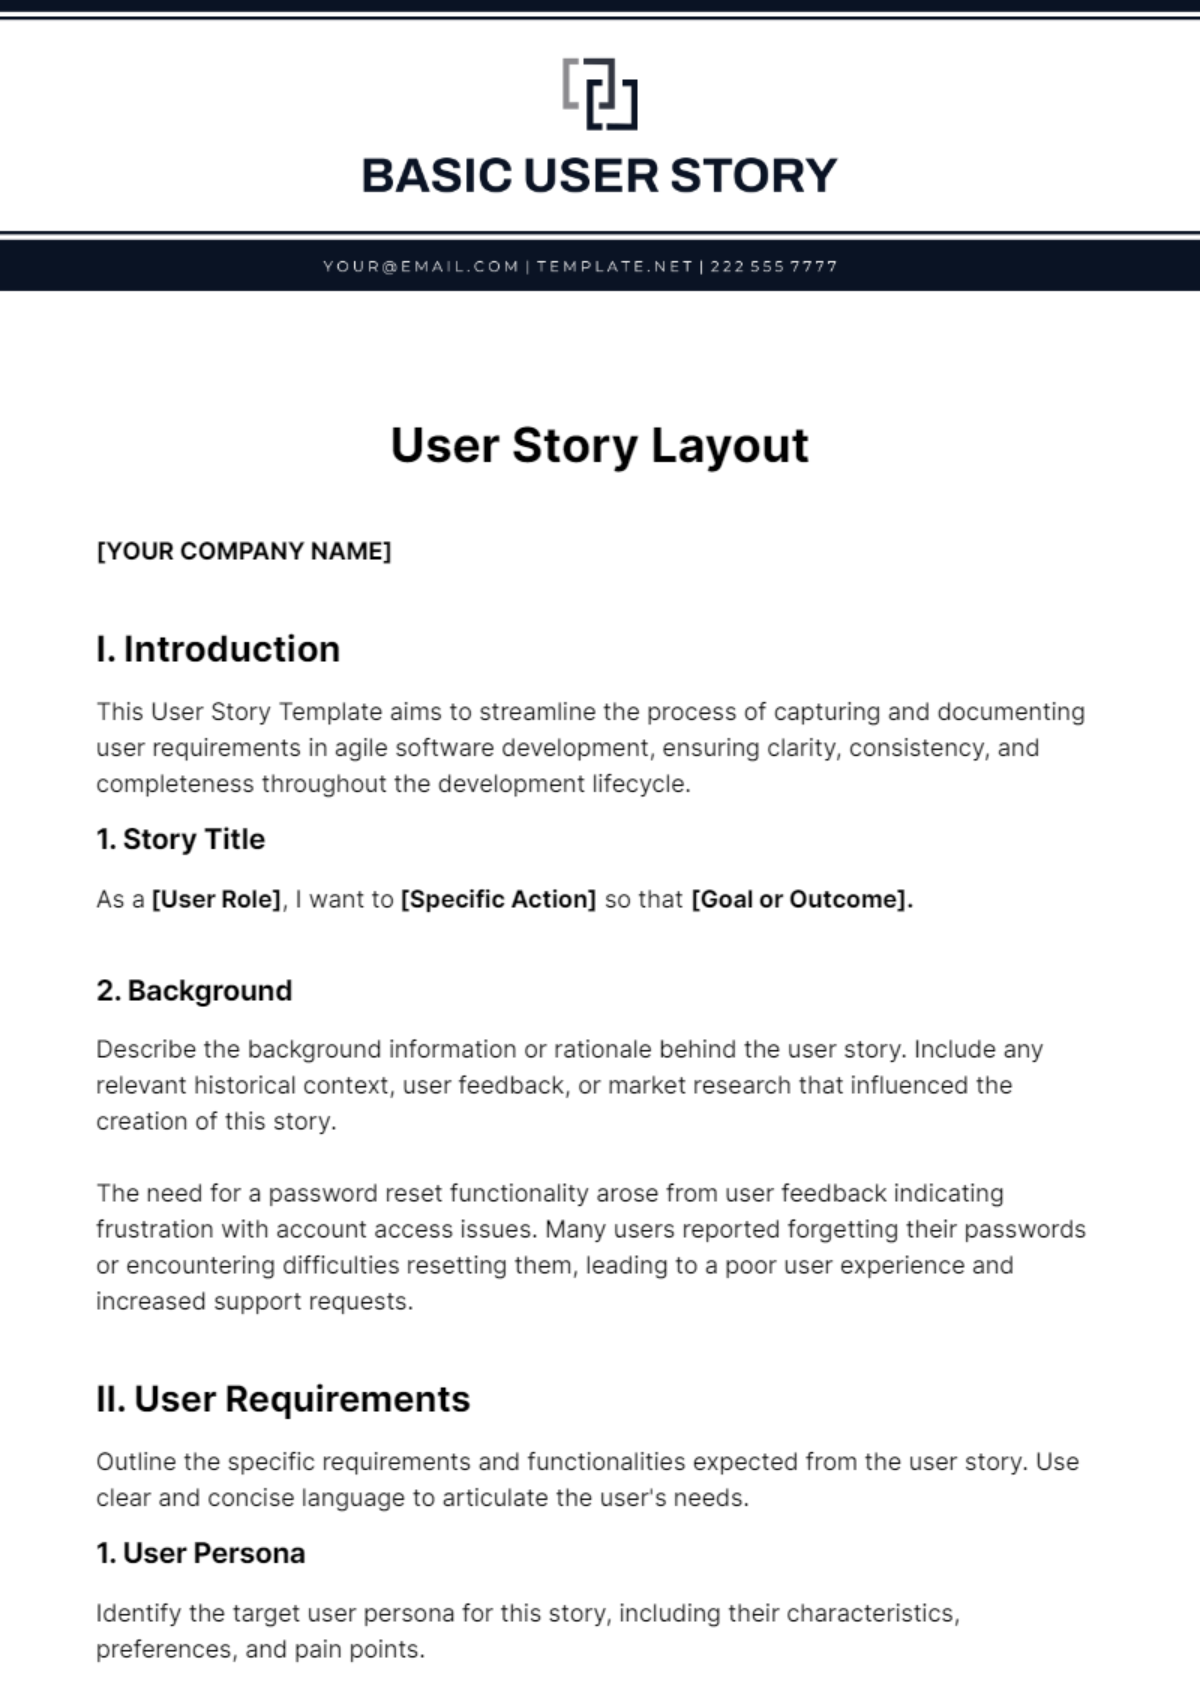 Free User Story Layout Template